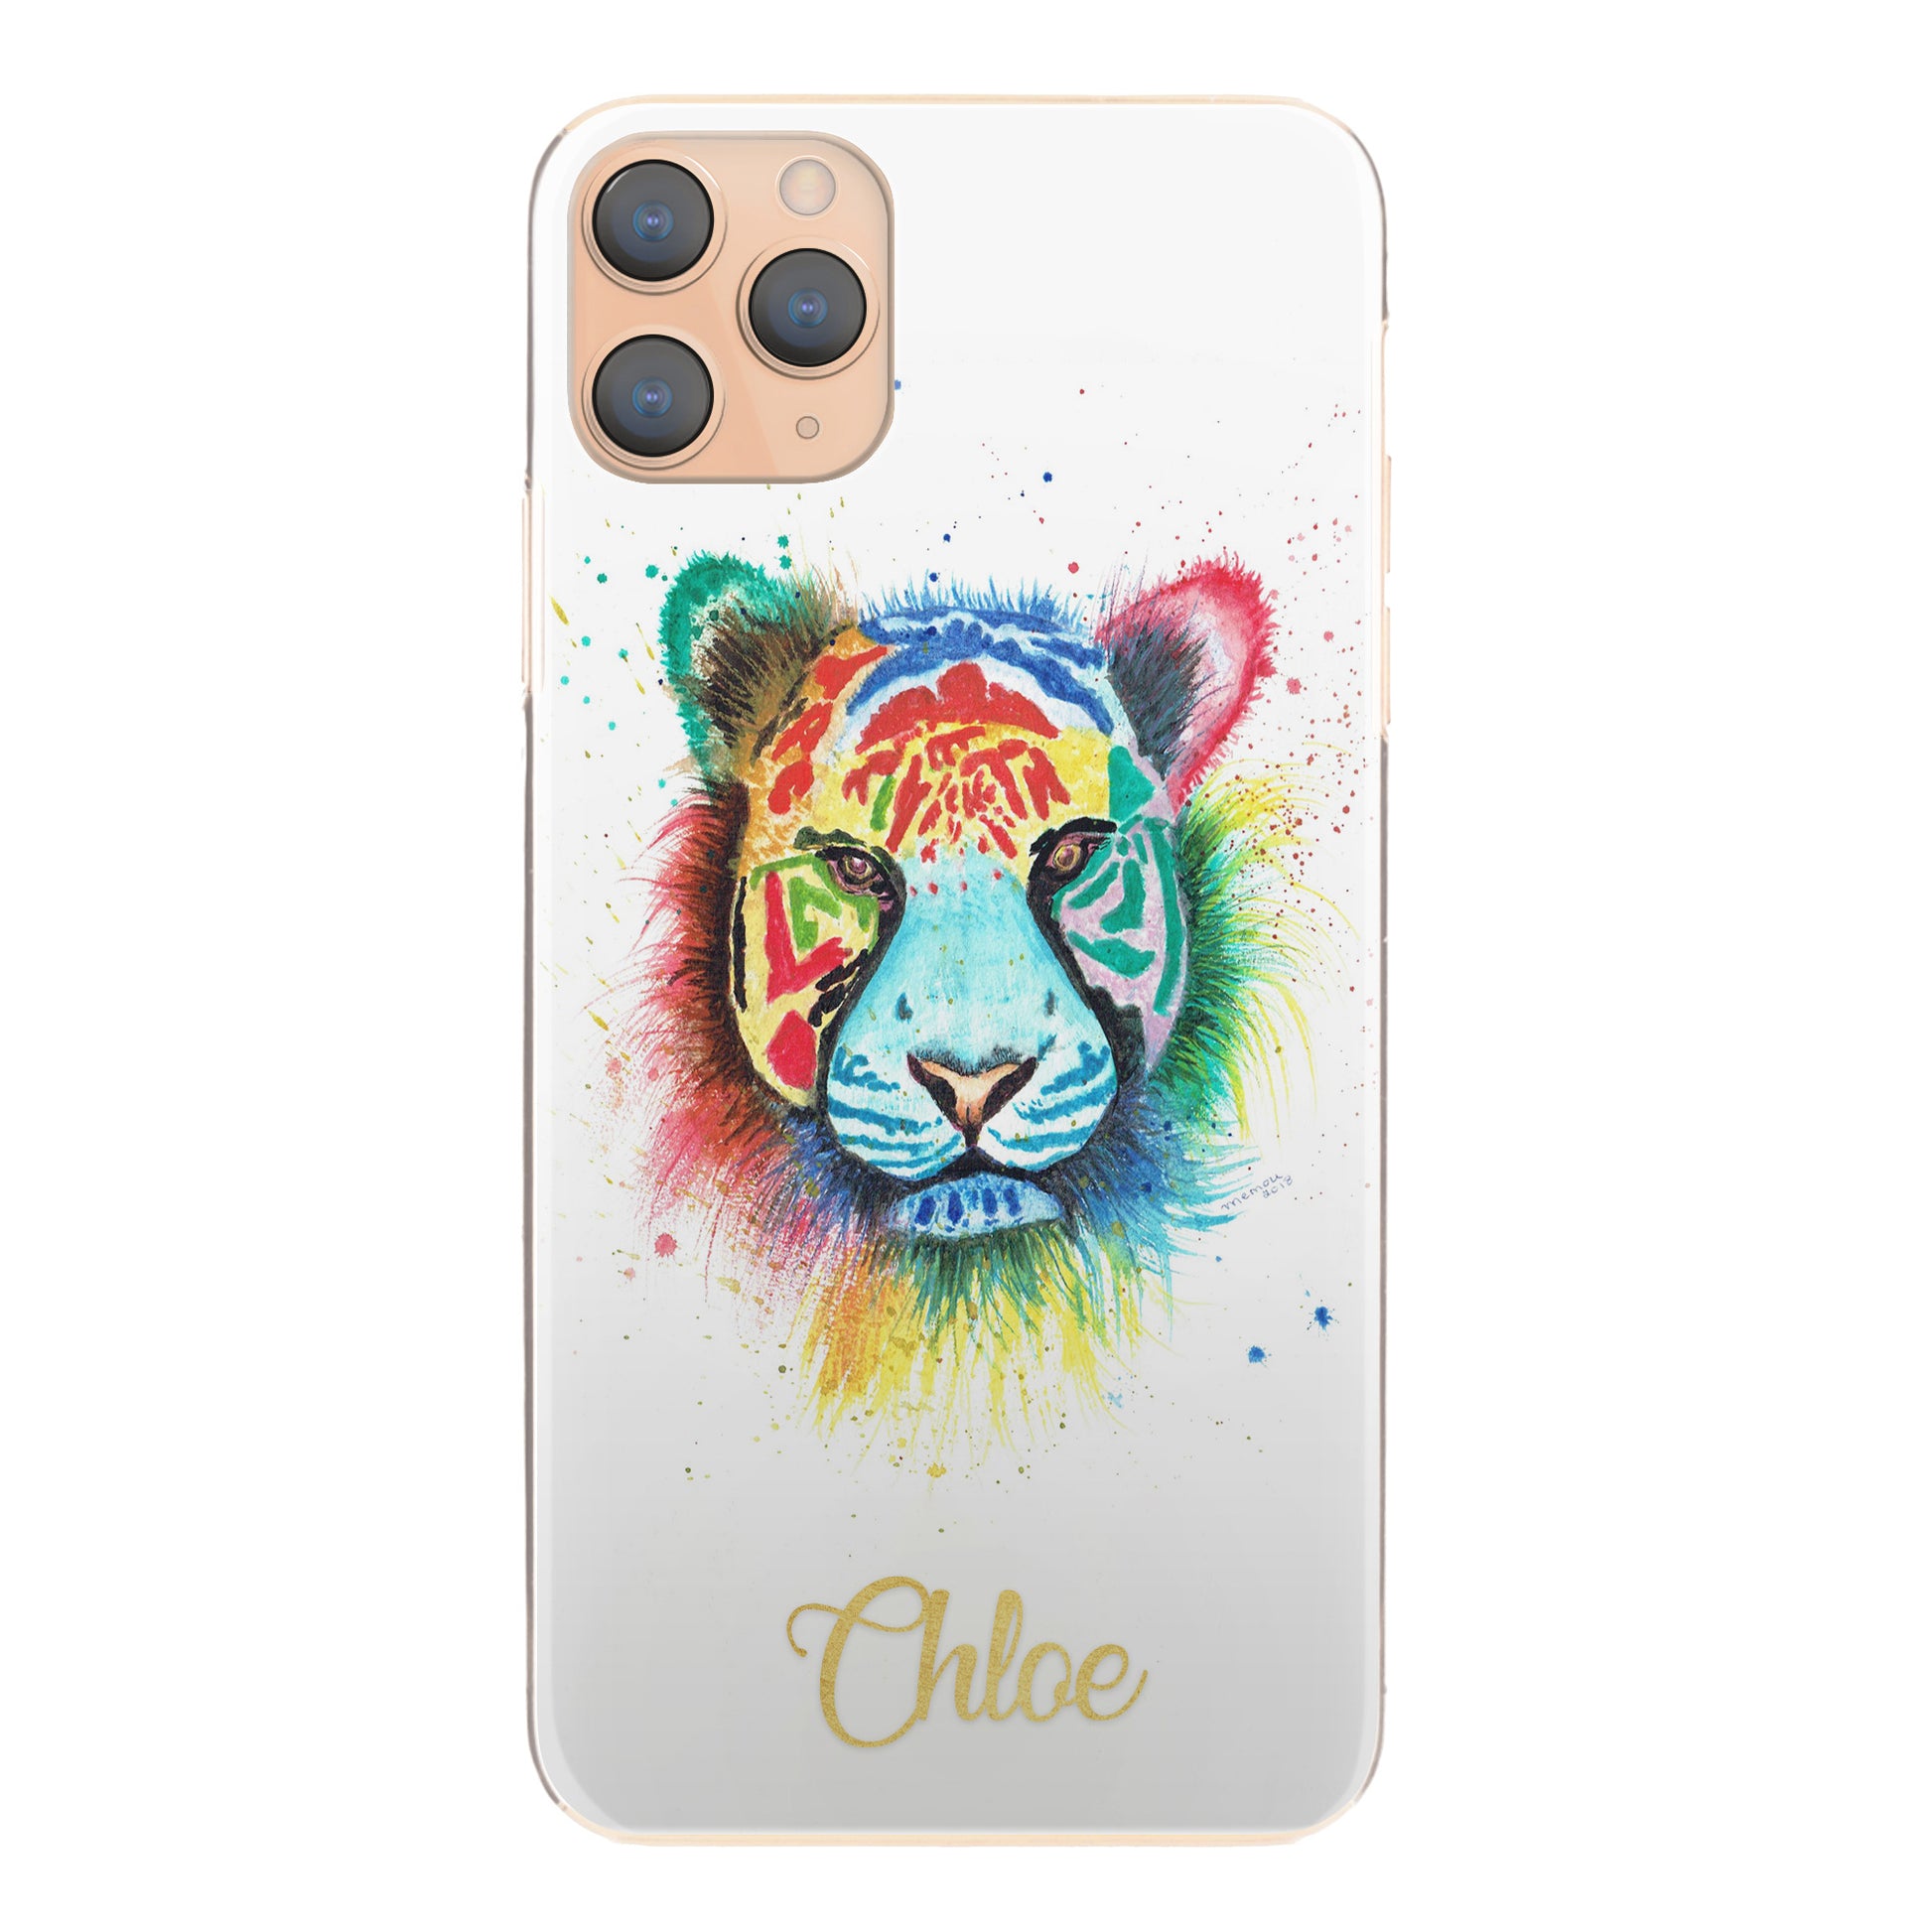 Personalised Xiaomi Phone Hard Case with Rainbow Tiger and Gold Text